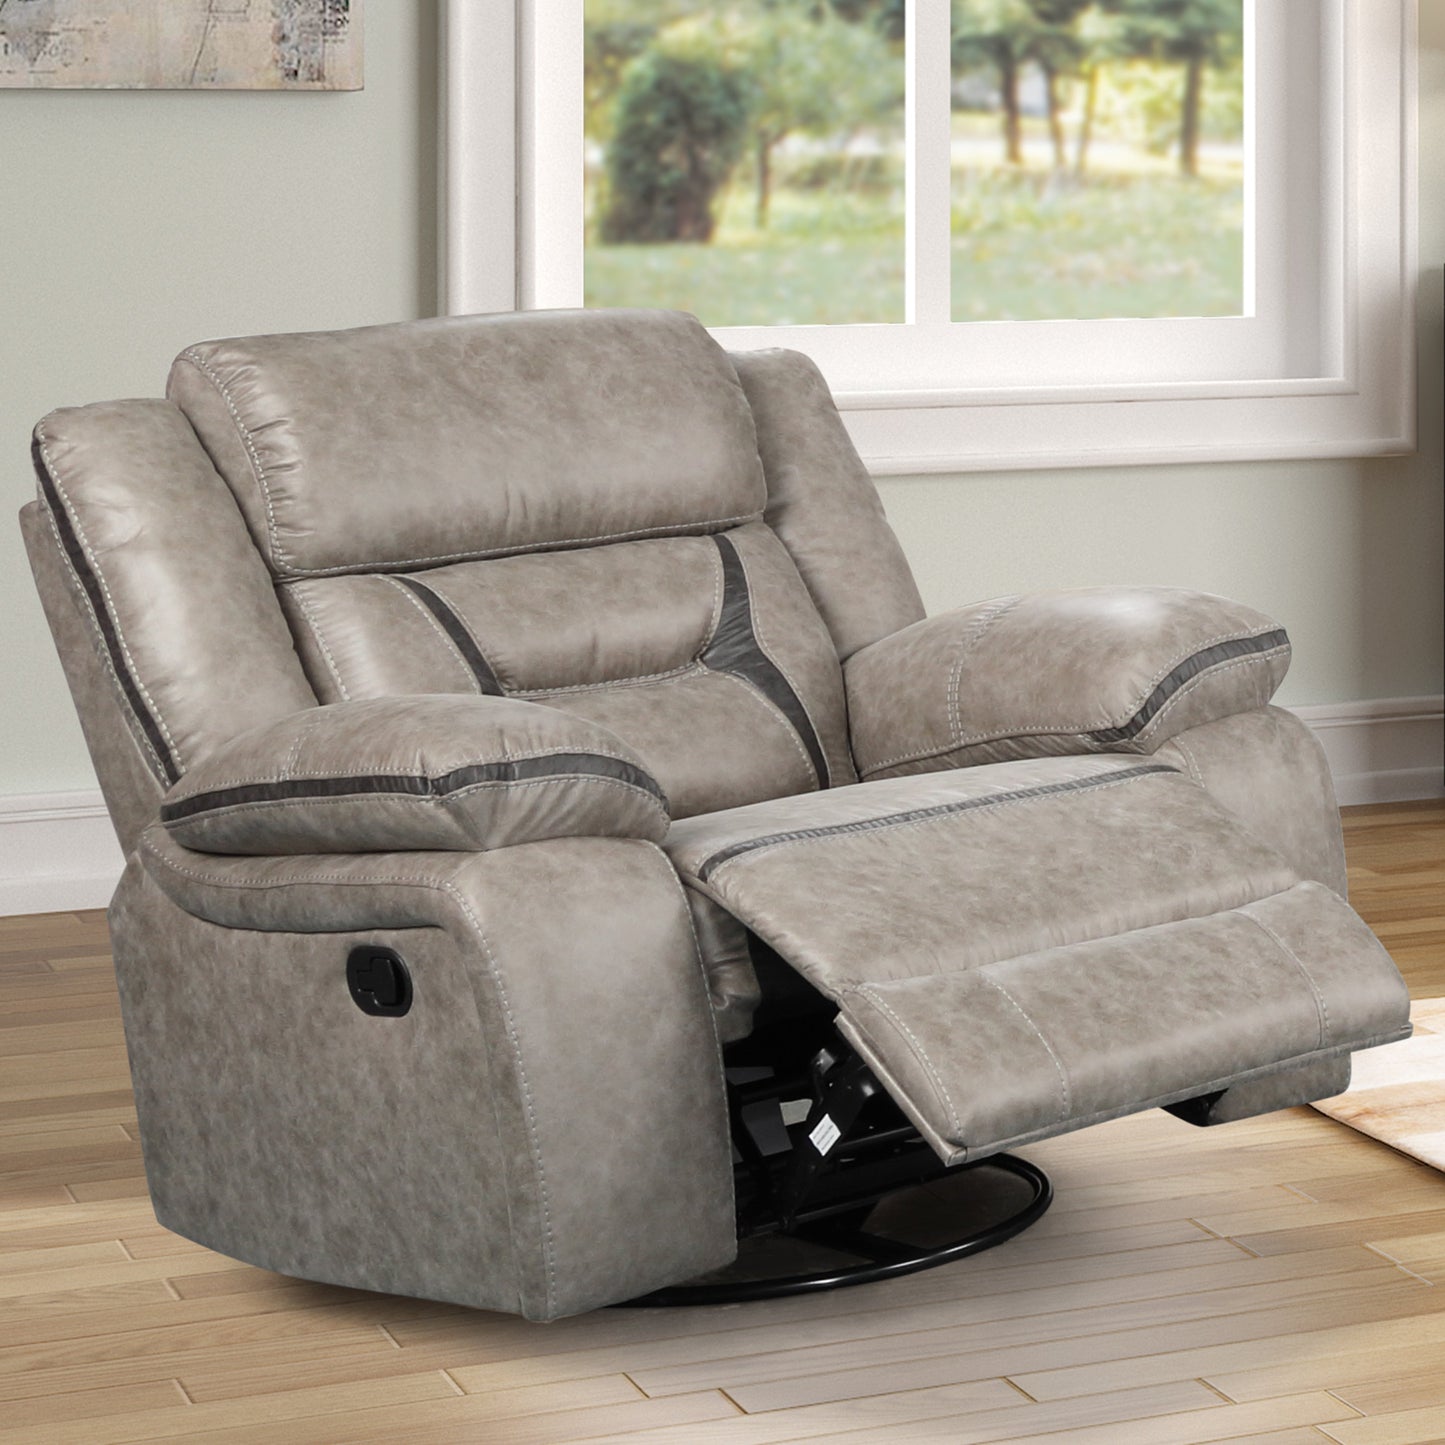 Elkton Manual Motion Recliner with Storage Console, Taupe